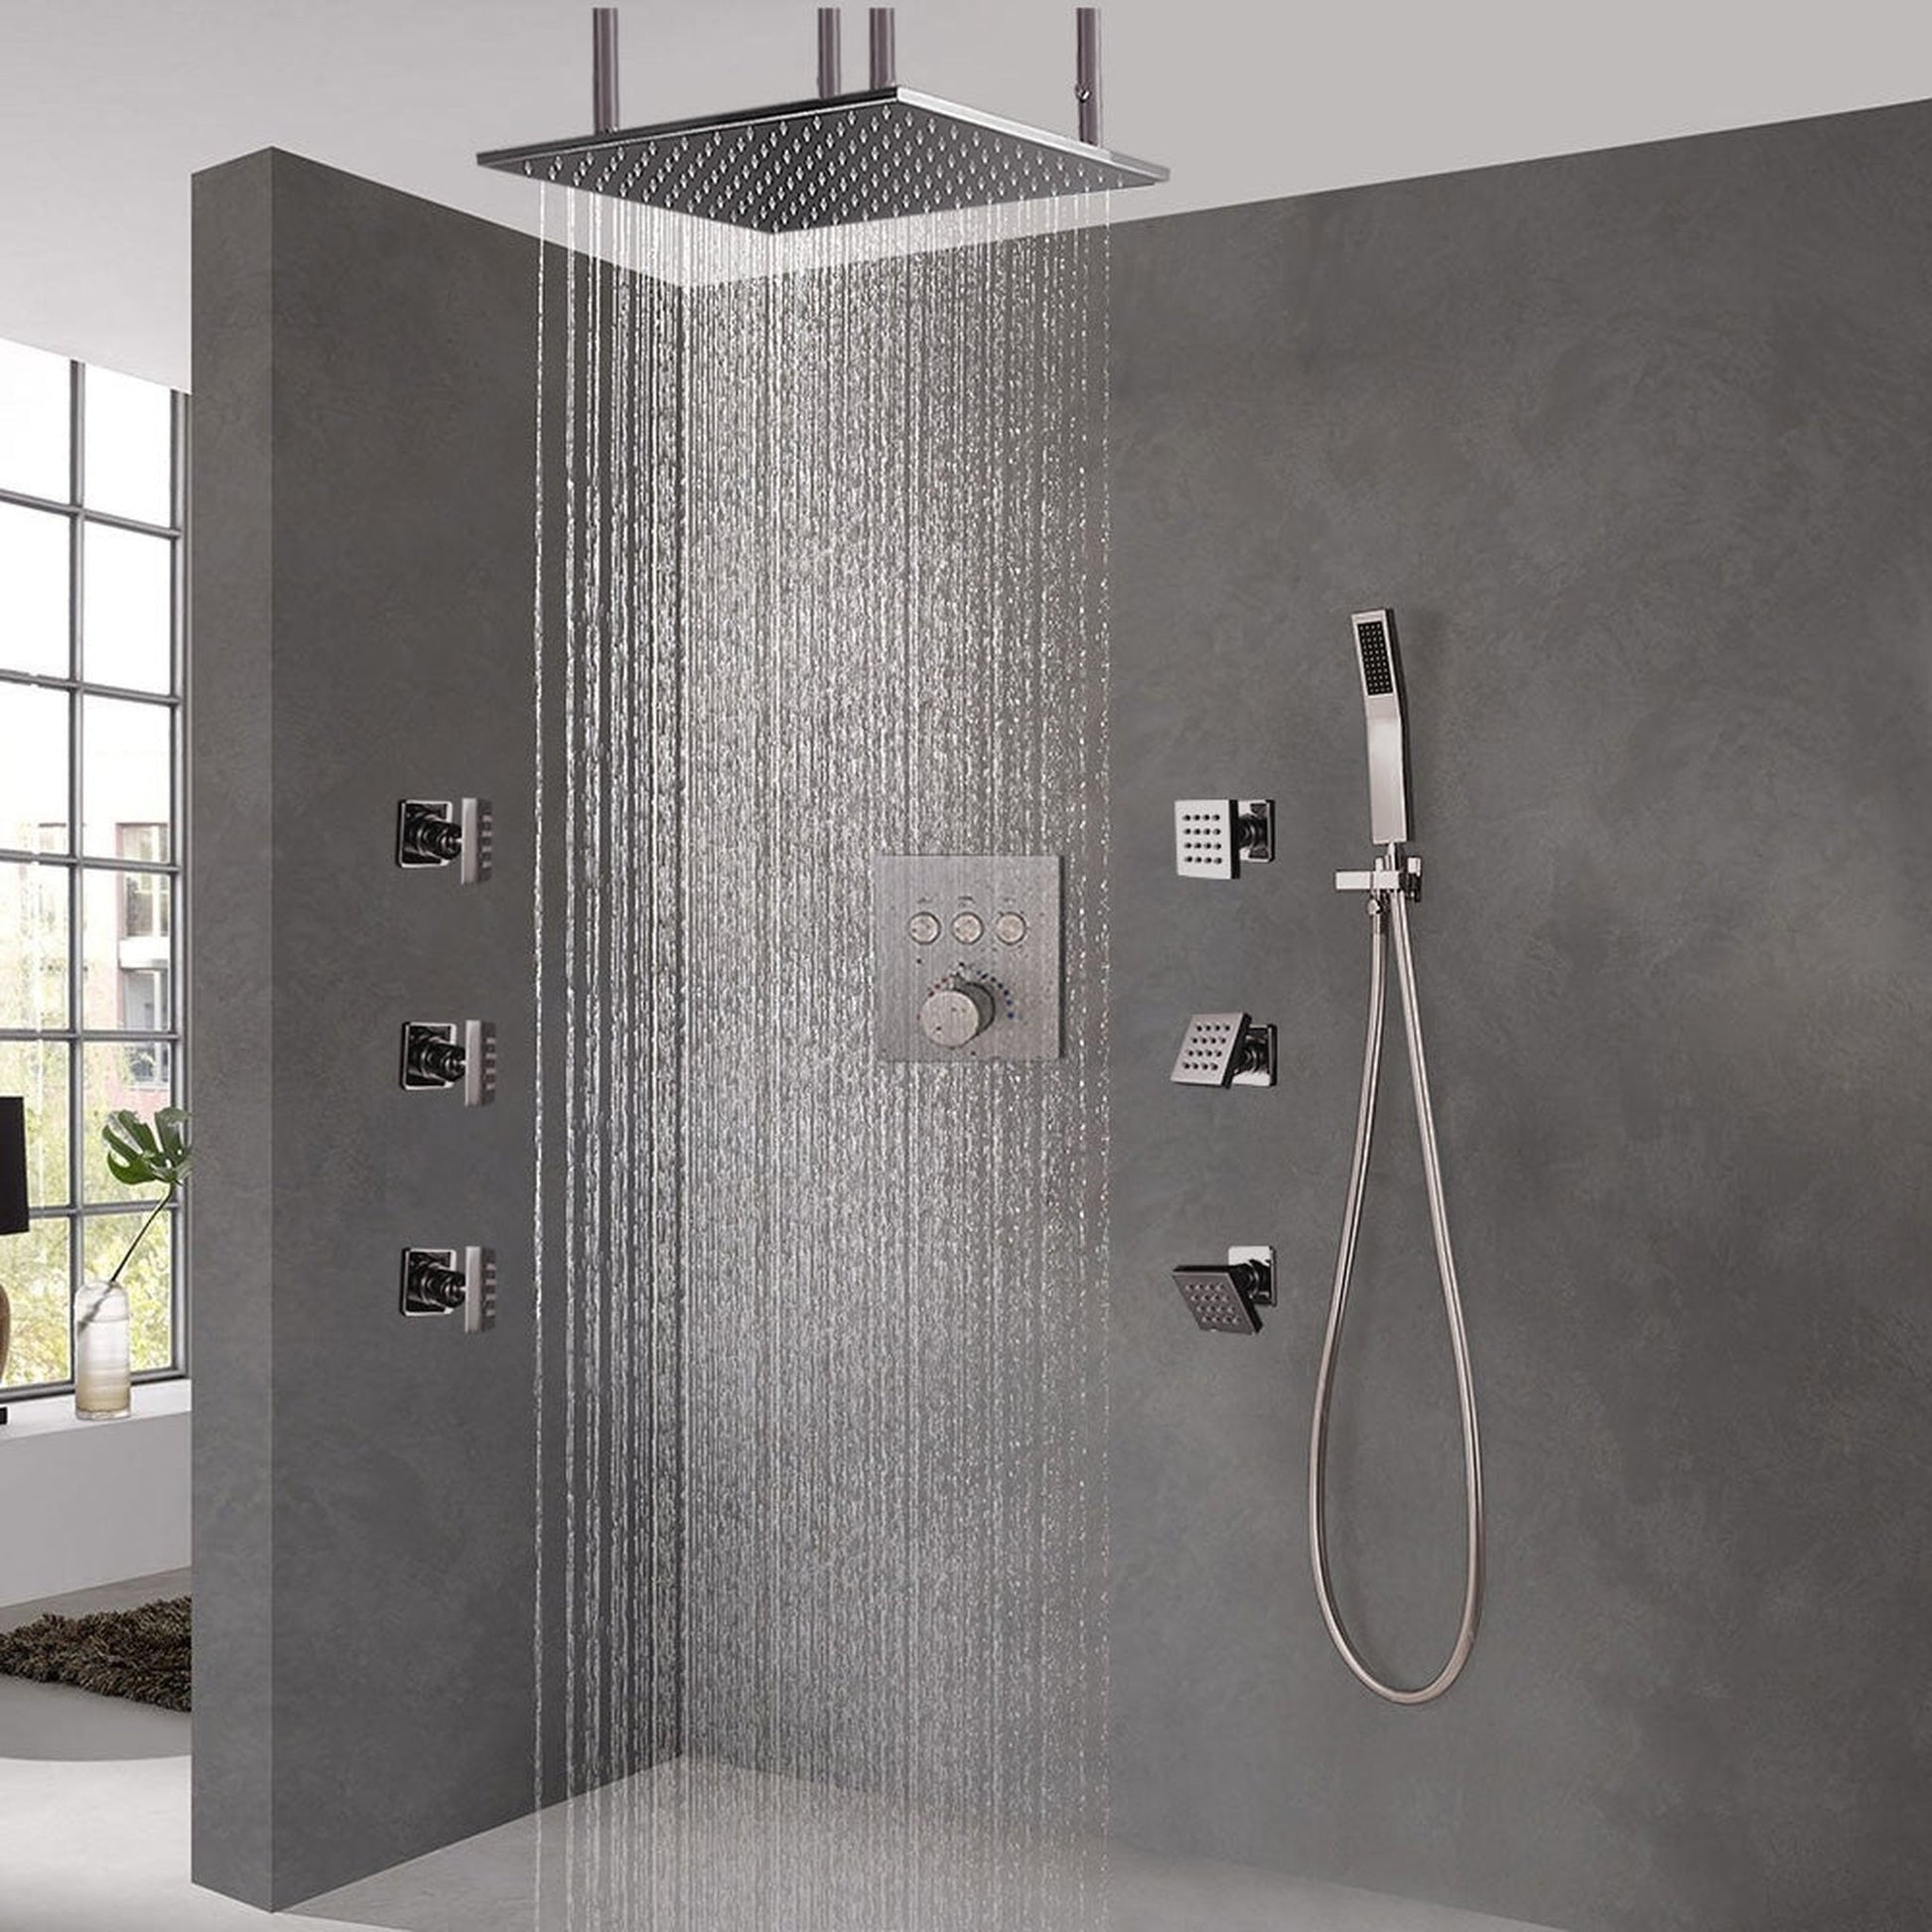 FontanaShowers Creative Luxury 20" Brushed Nickel Square Ceiling Mounted Rainfall Shower System With Thermostat Mixer, 6-Jet Body Sprays And Hand Shower